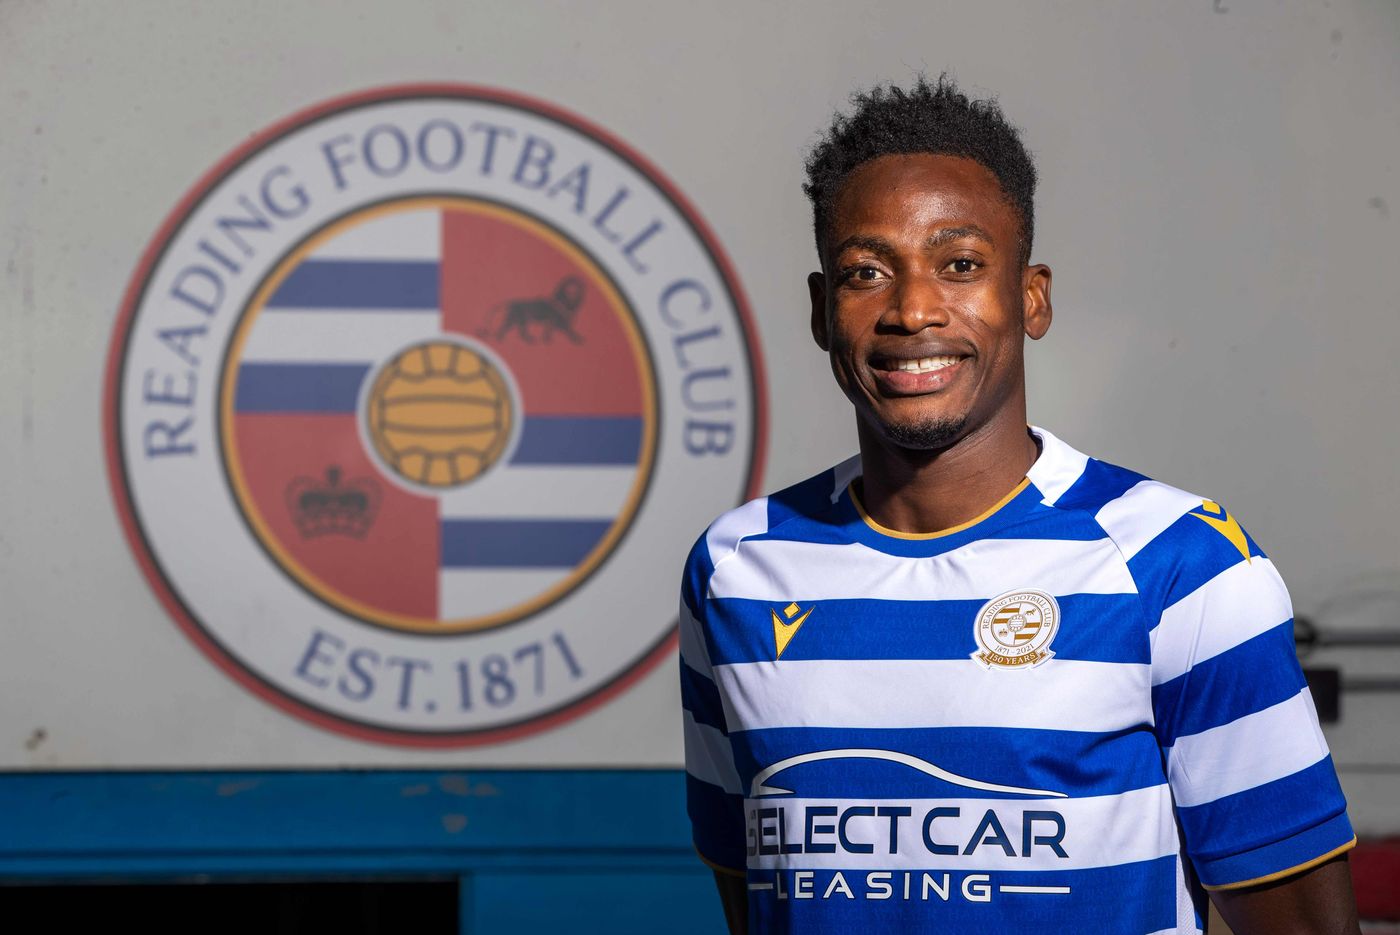 Ghana defender Baba Rahman lifts lid on why he joined Reading FC from Chelsea